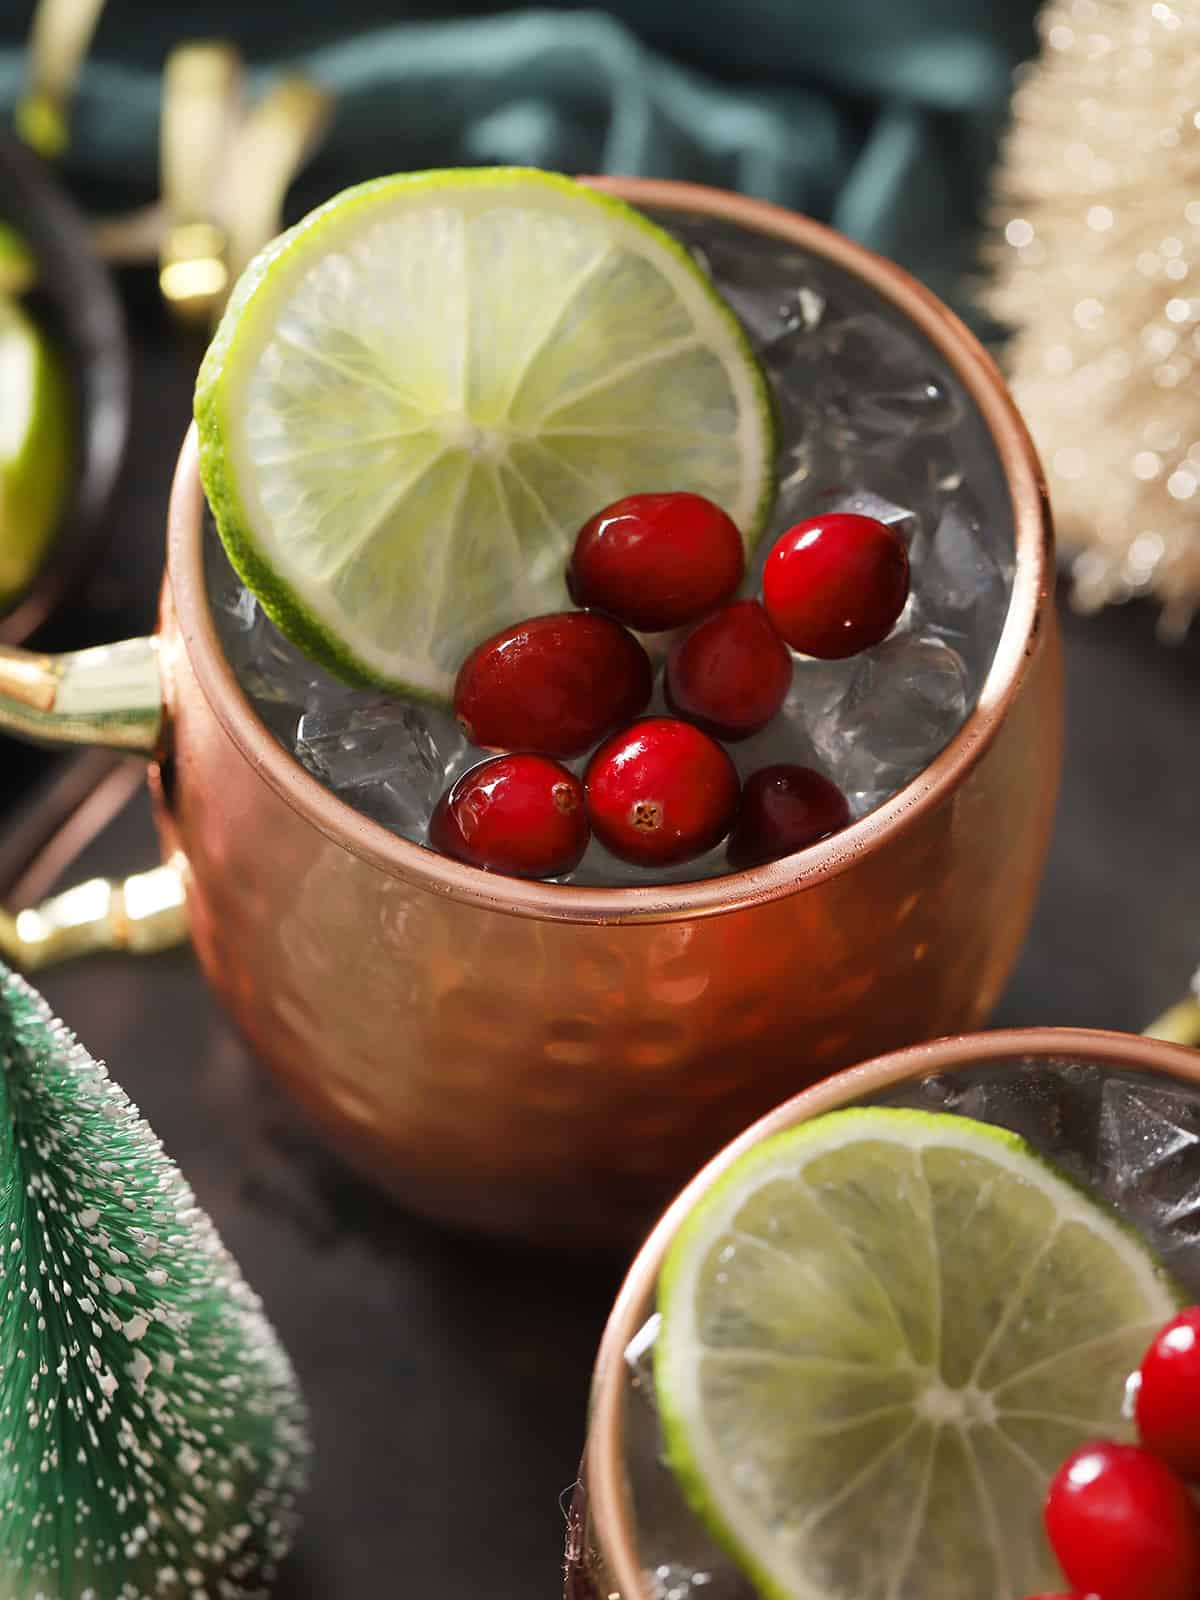 Copper mugs filled with cranberry moscow mule cocktail, garnished with lime slices and fresh cranberries.